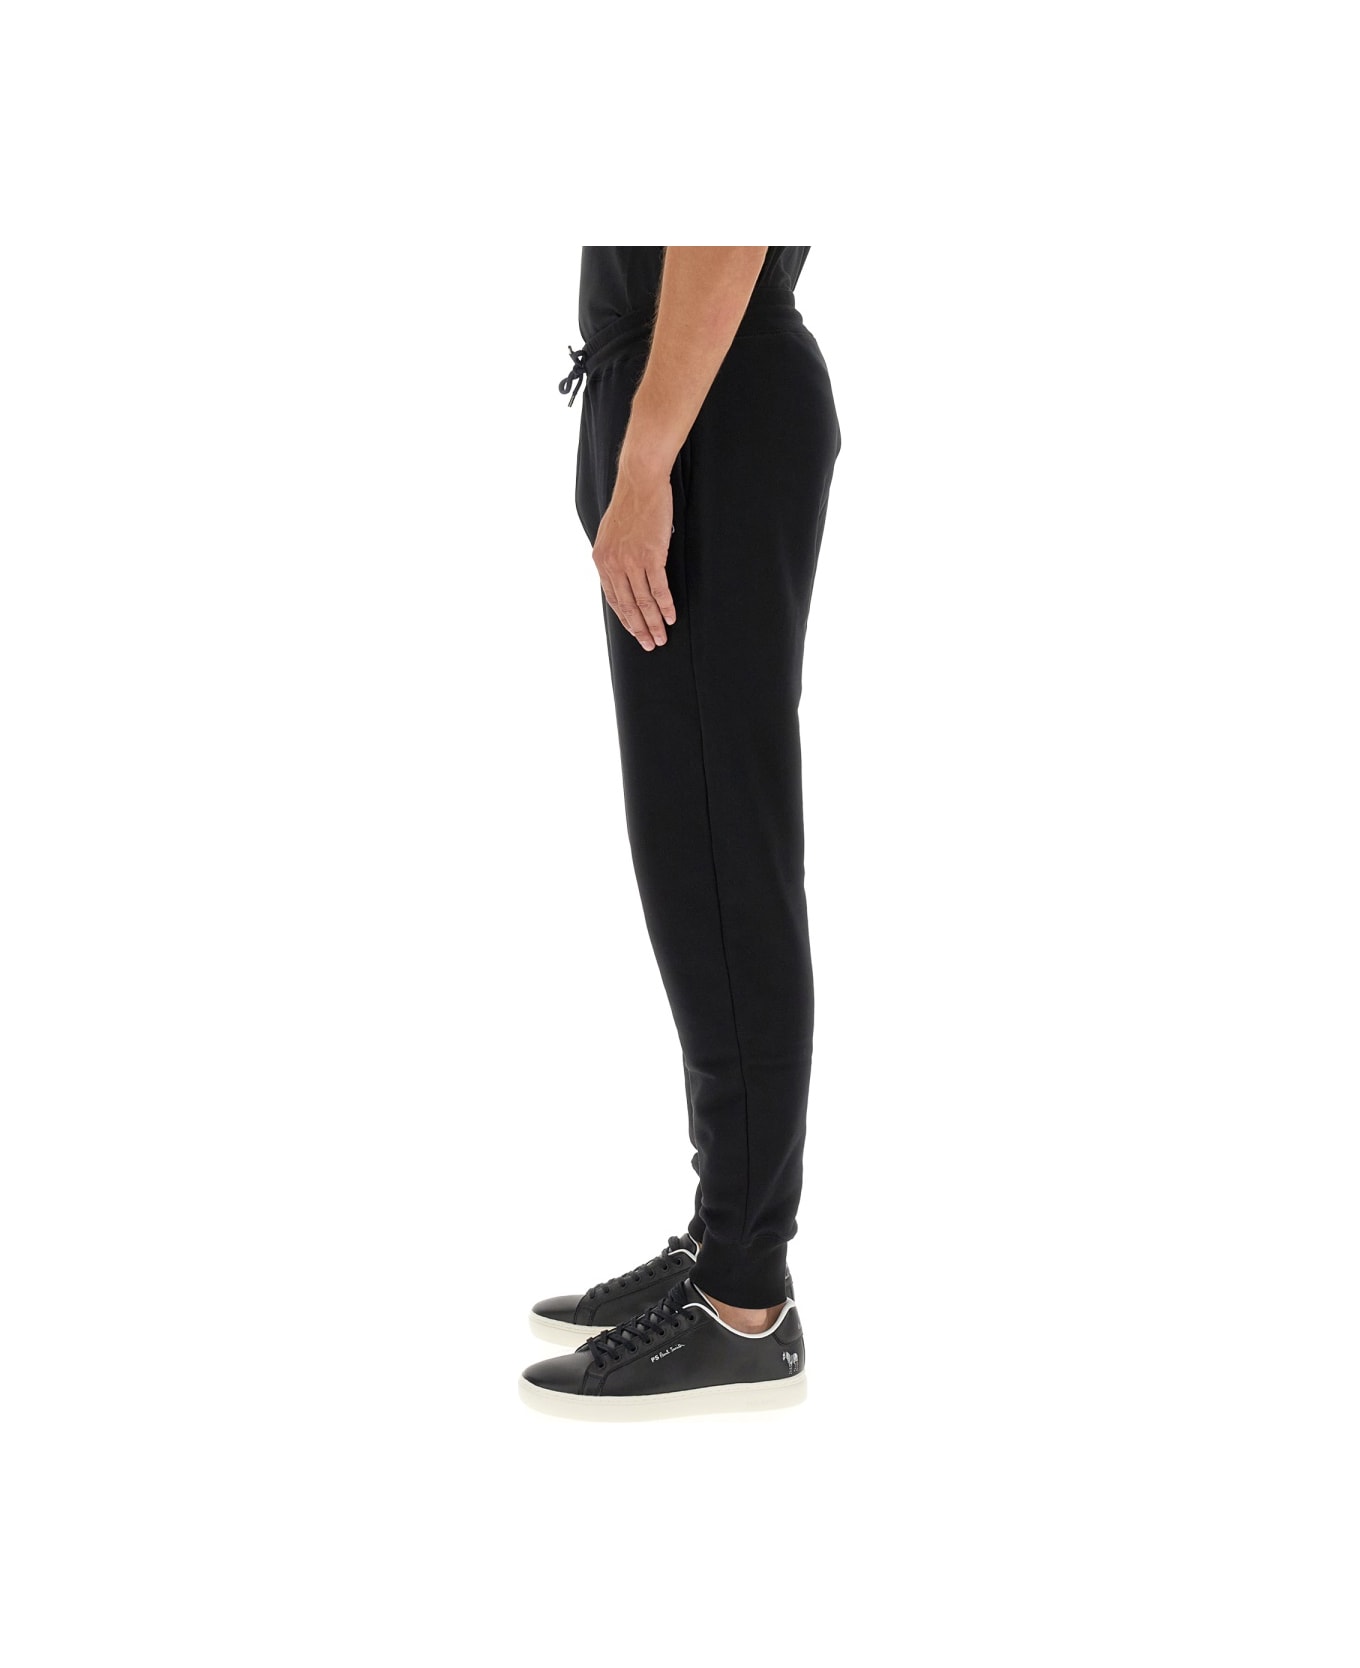 PS by Paul Smith Jogging Pants - BLACK